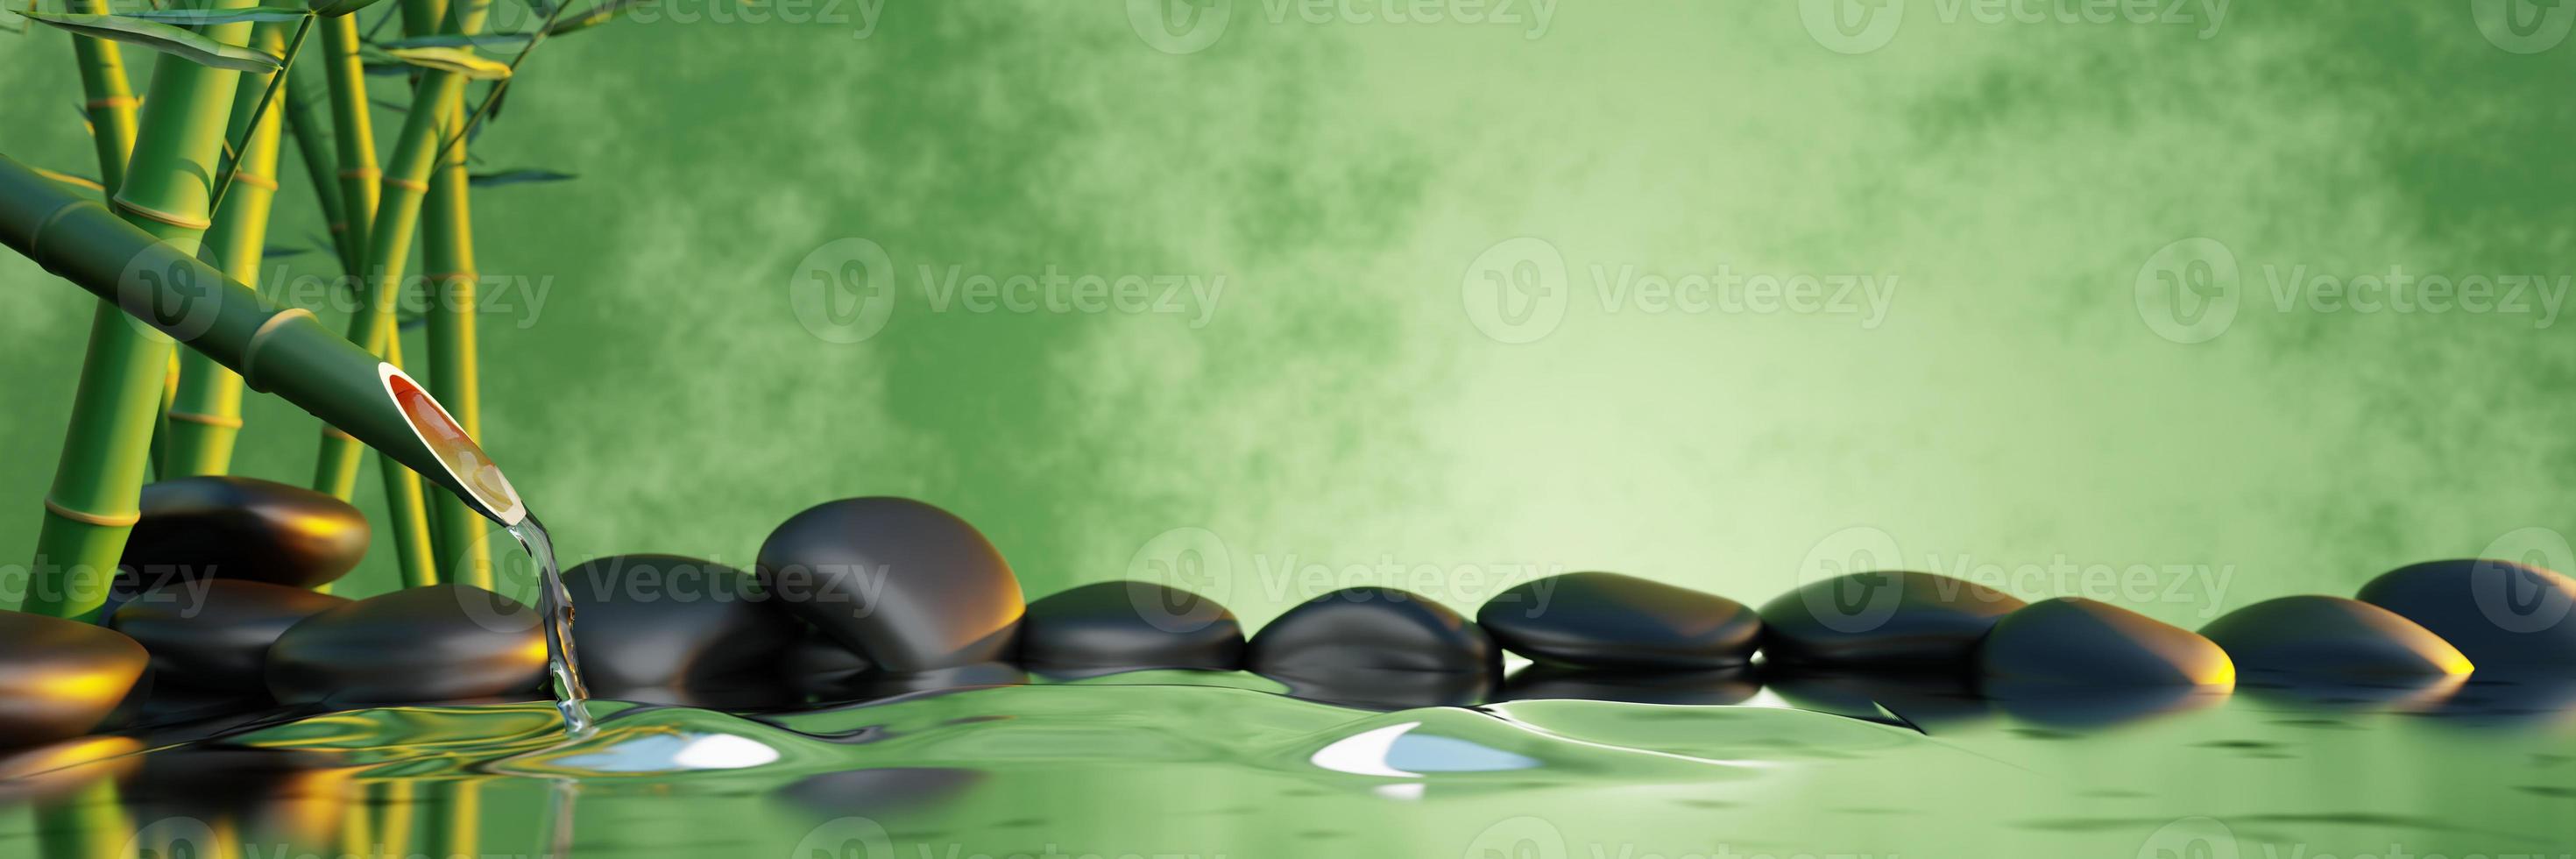 Clearwater flows out of bamboo sections. The shiny black stones overlap. The background is green and yellow waves like water waves. Spa style images. 3D Rendering photo